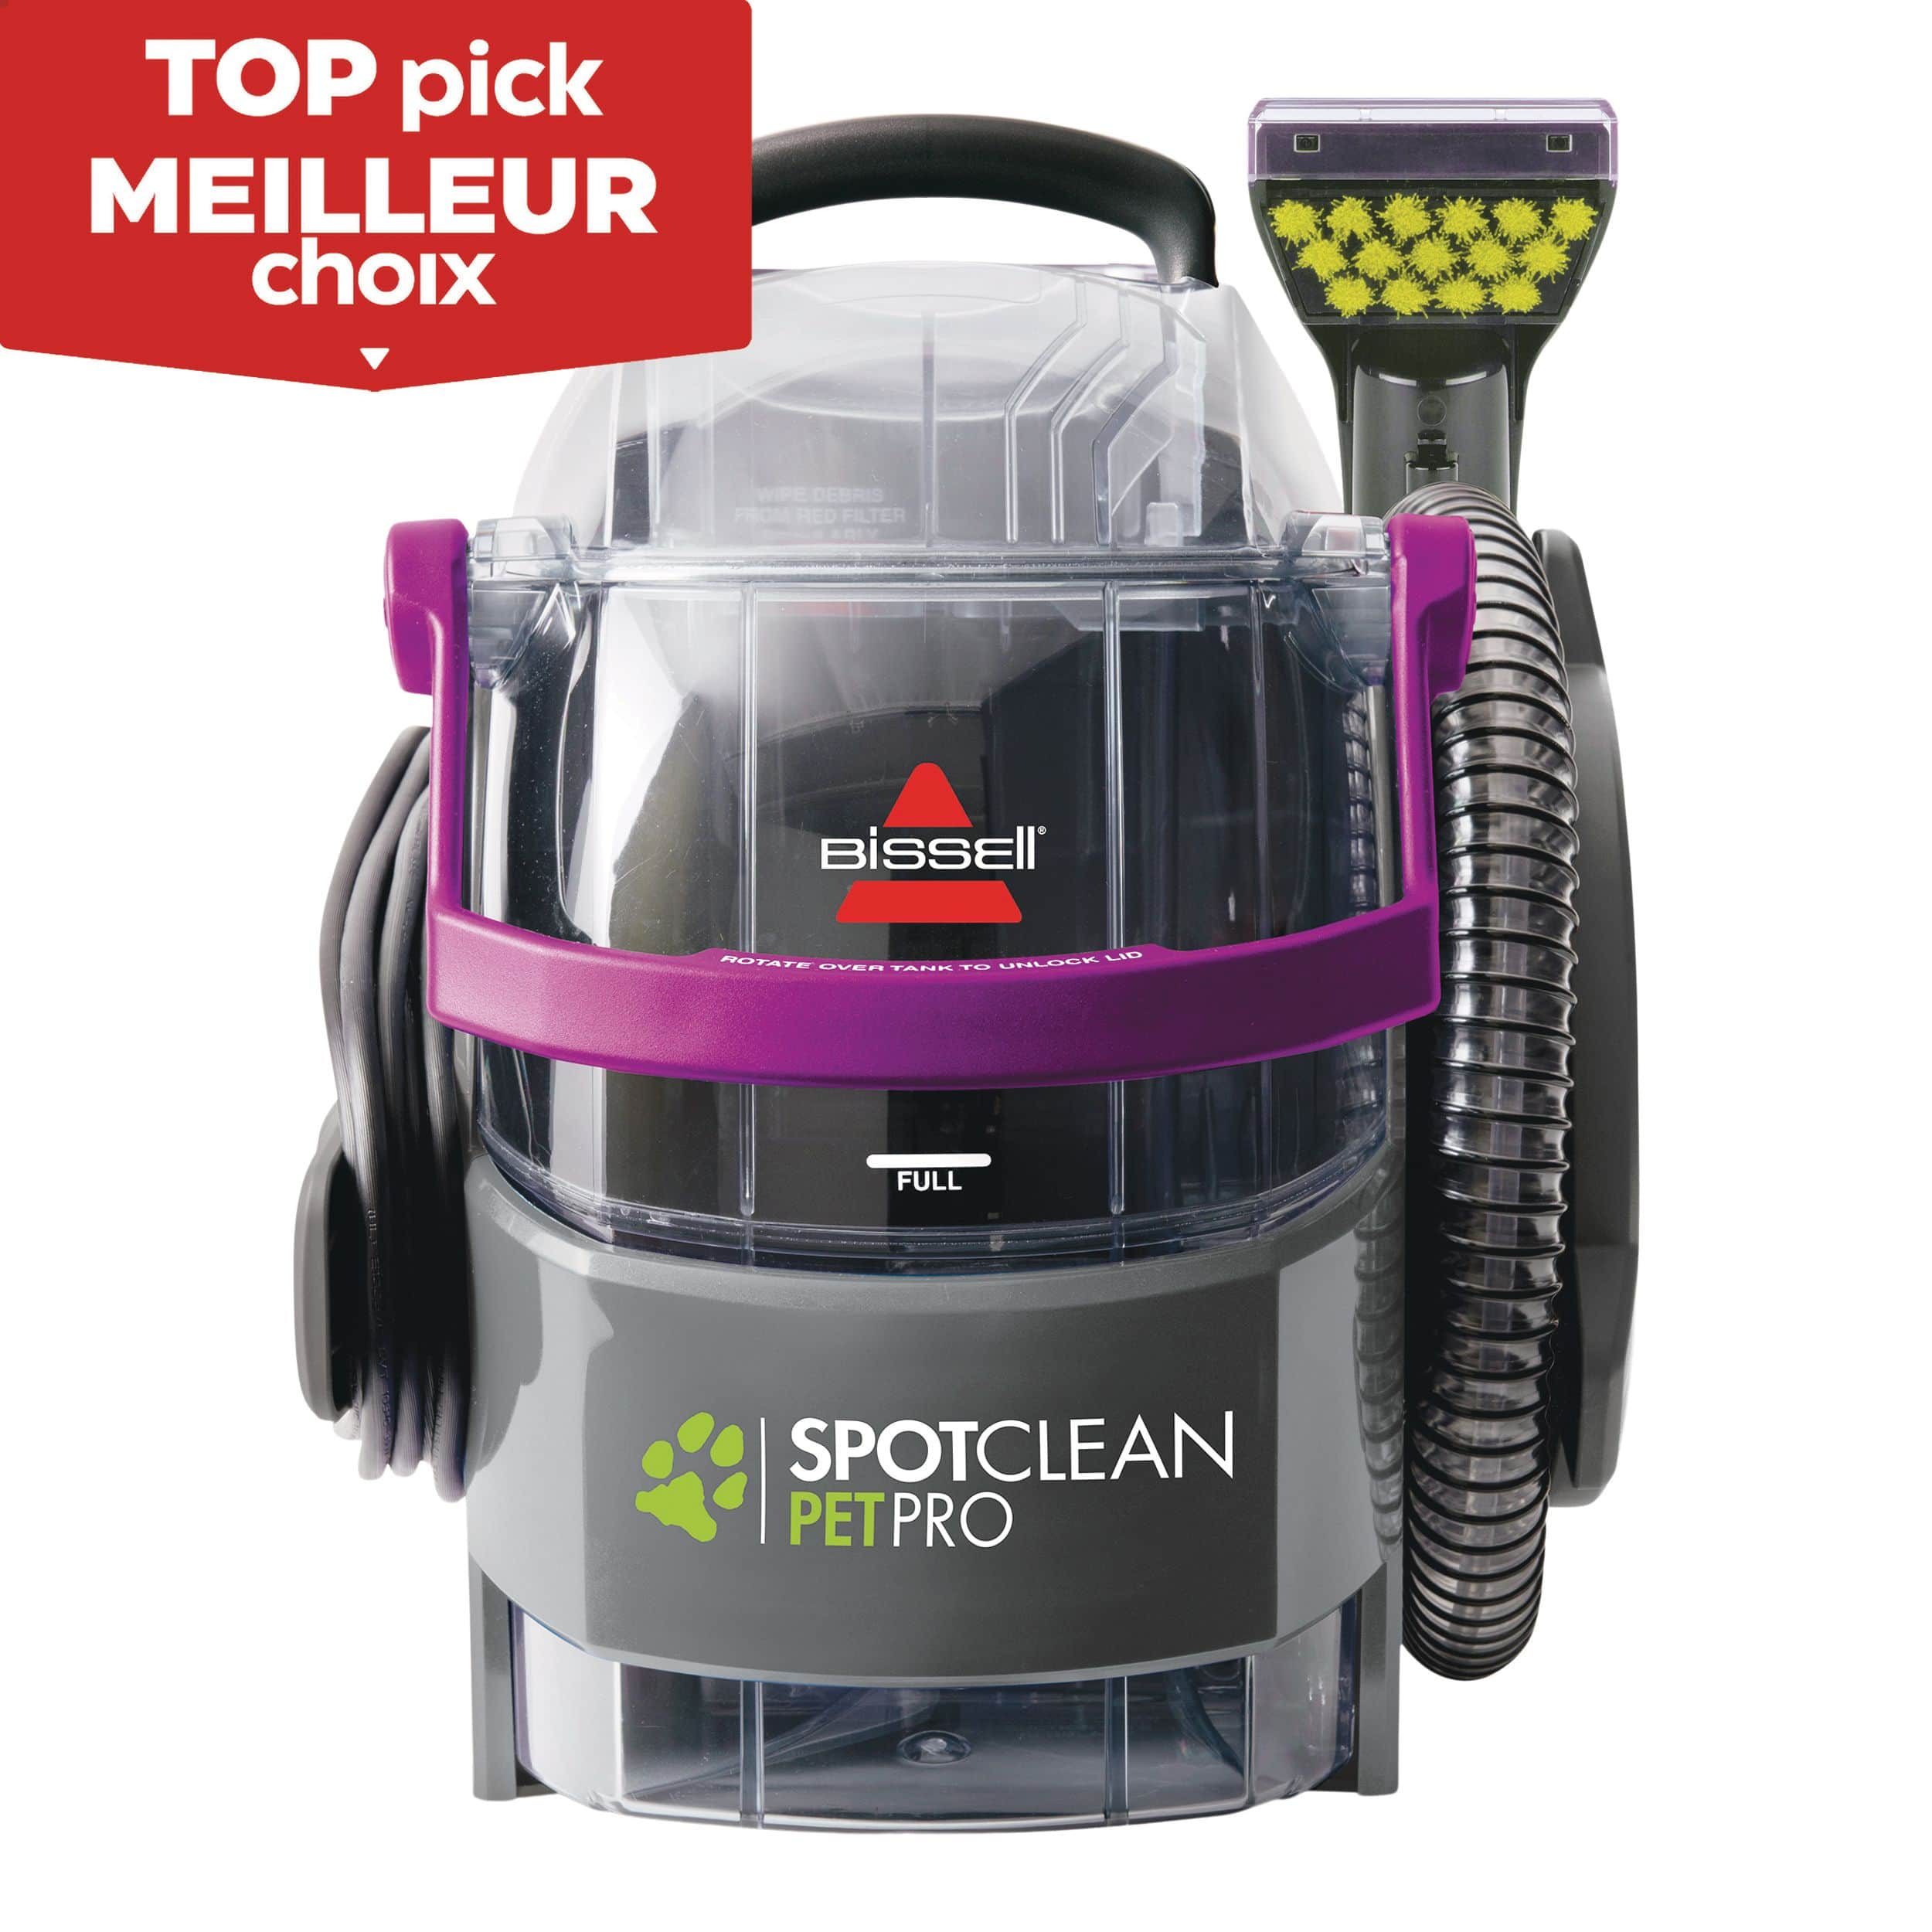 BISSELL SpotClean PetPro Portable Carpet & Upholstery Corded Deep